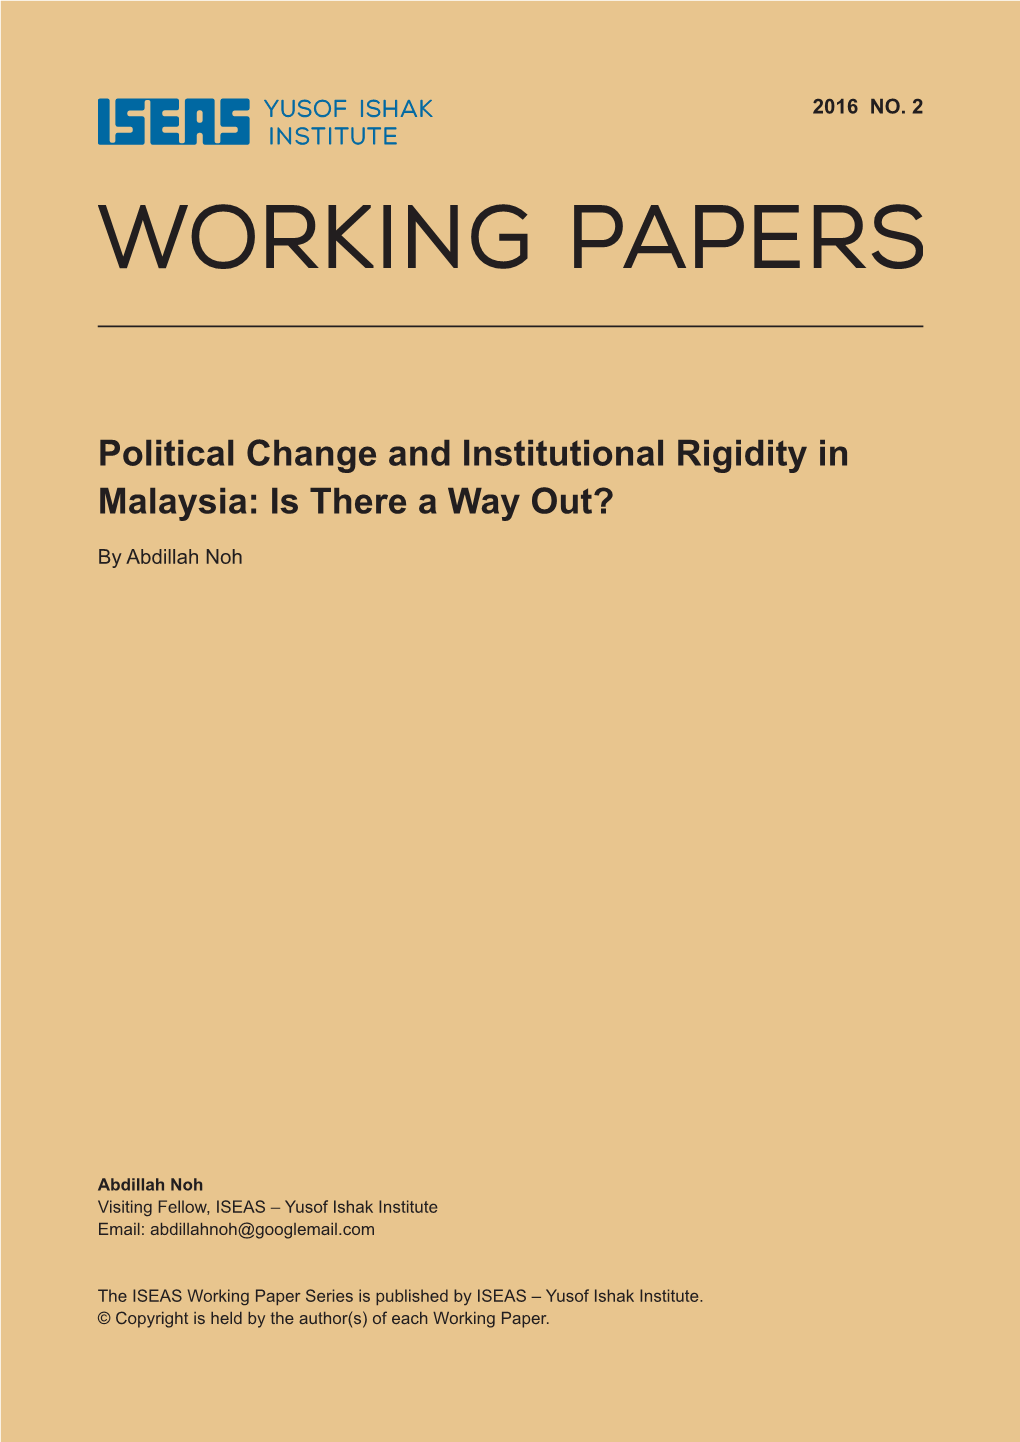 Political Change and Institutional Rigidity in Malaysia: Is There a Way Out?